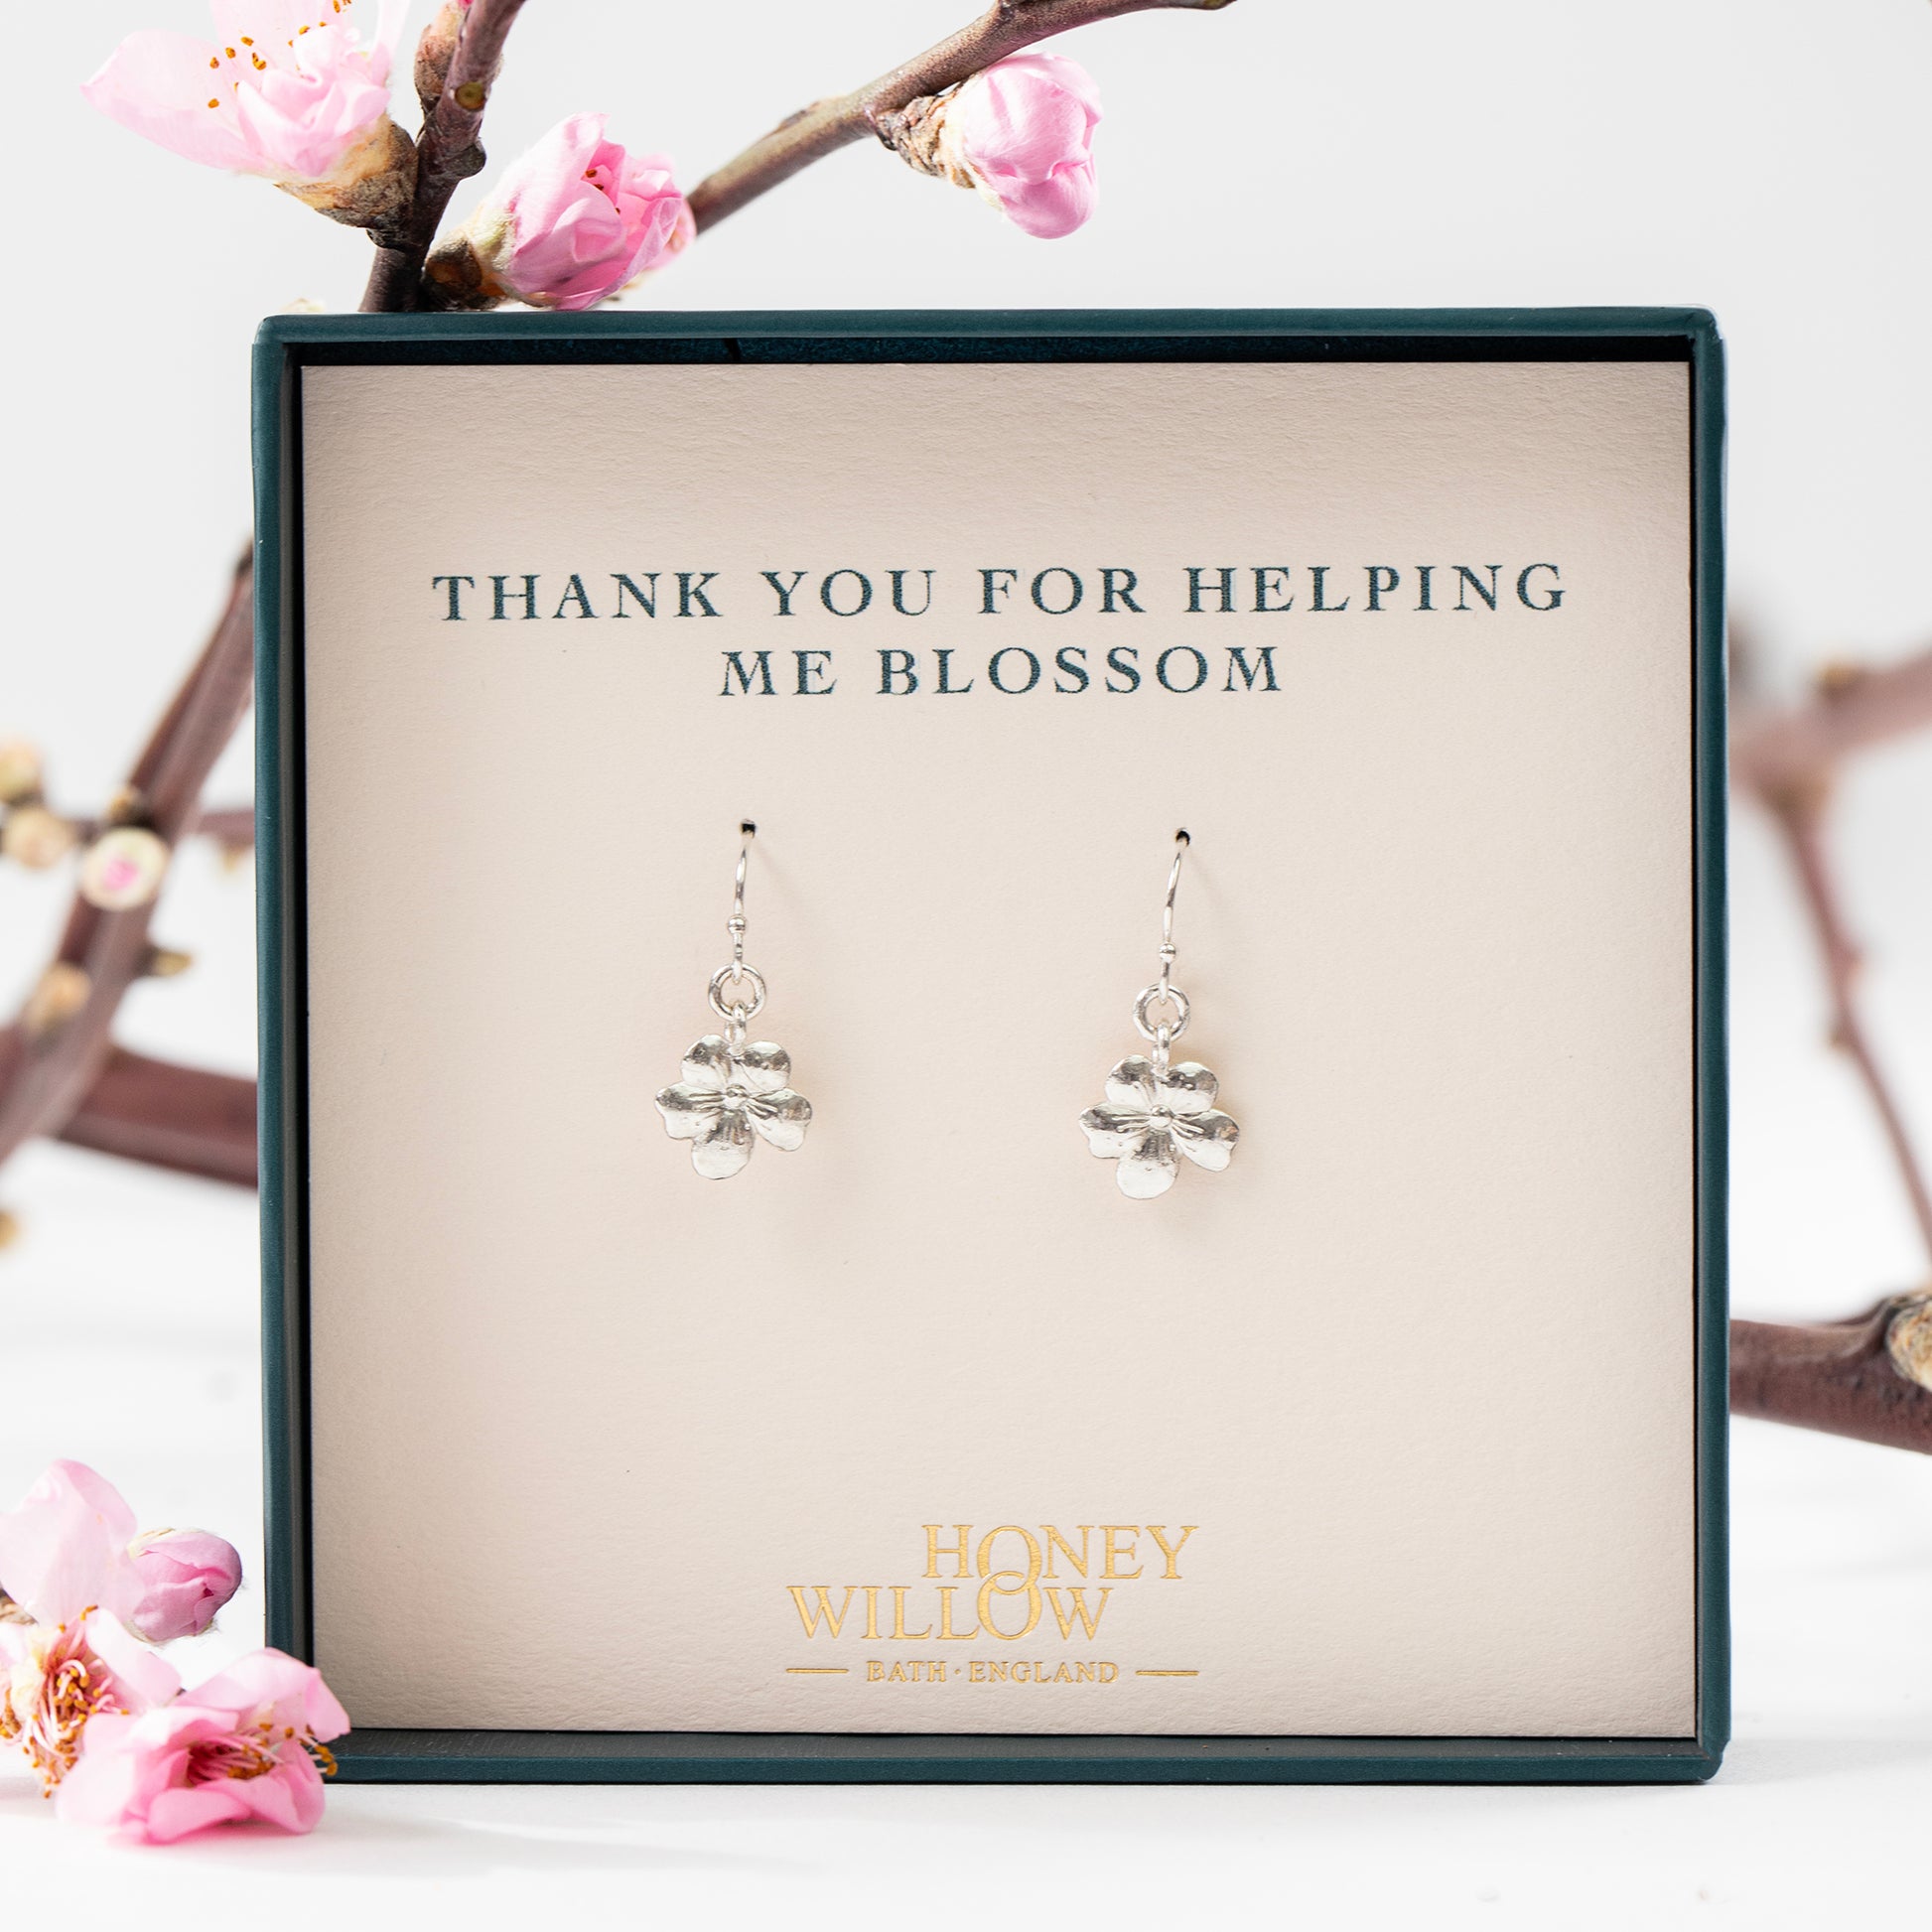 Thank you for helping me blossom earrings